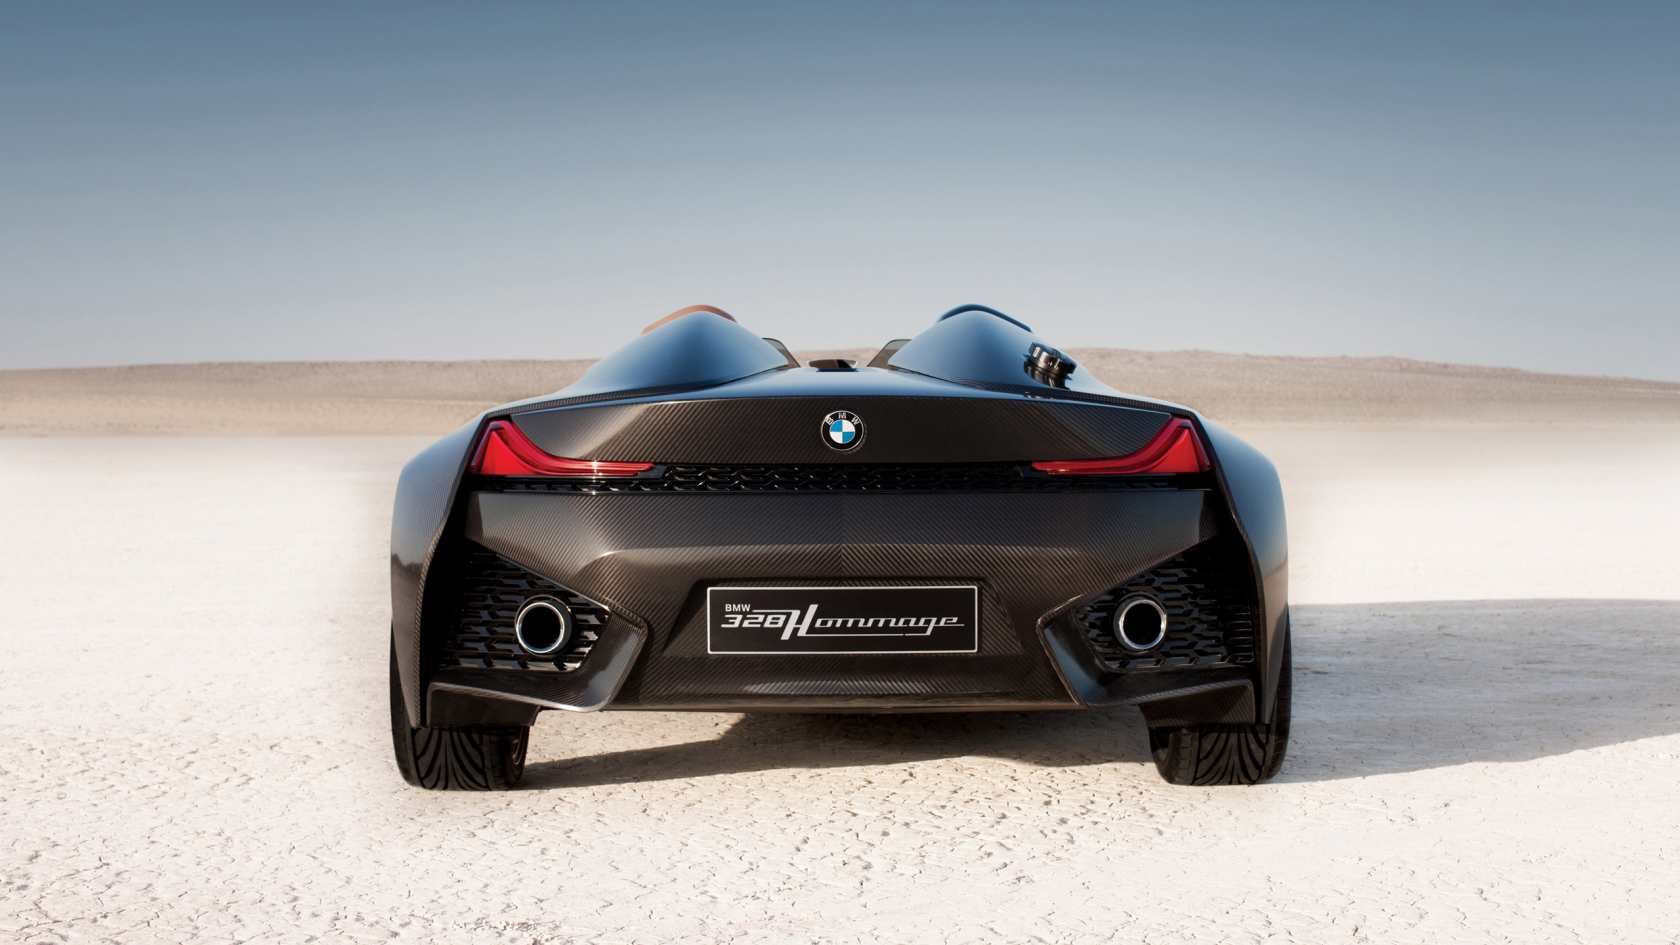 BMW 328 Hommage Rear for 1680 x 945 HDTV resolution